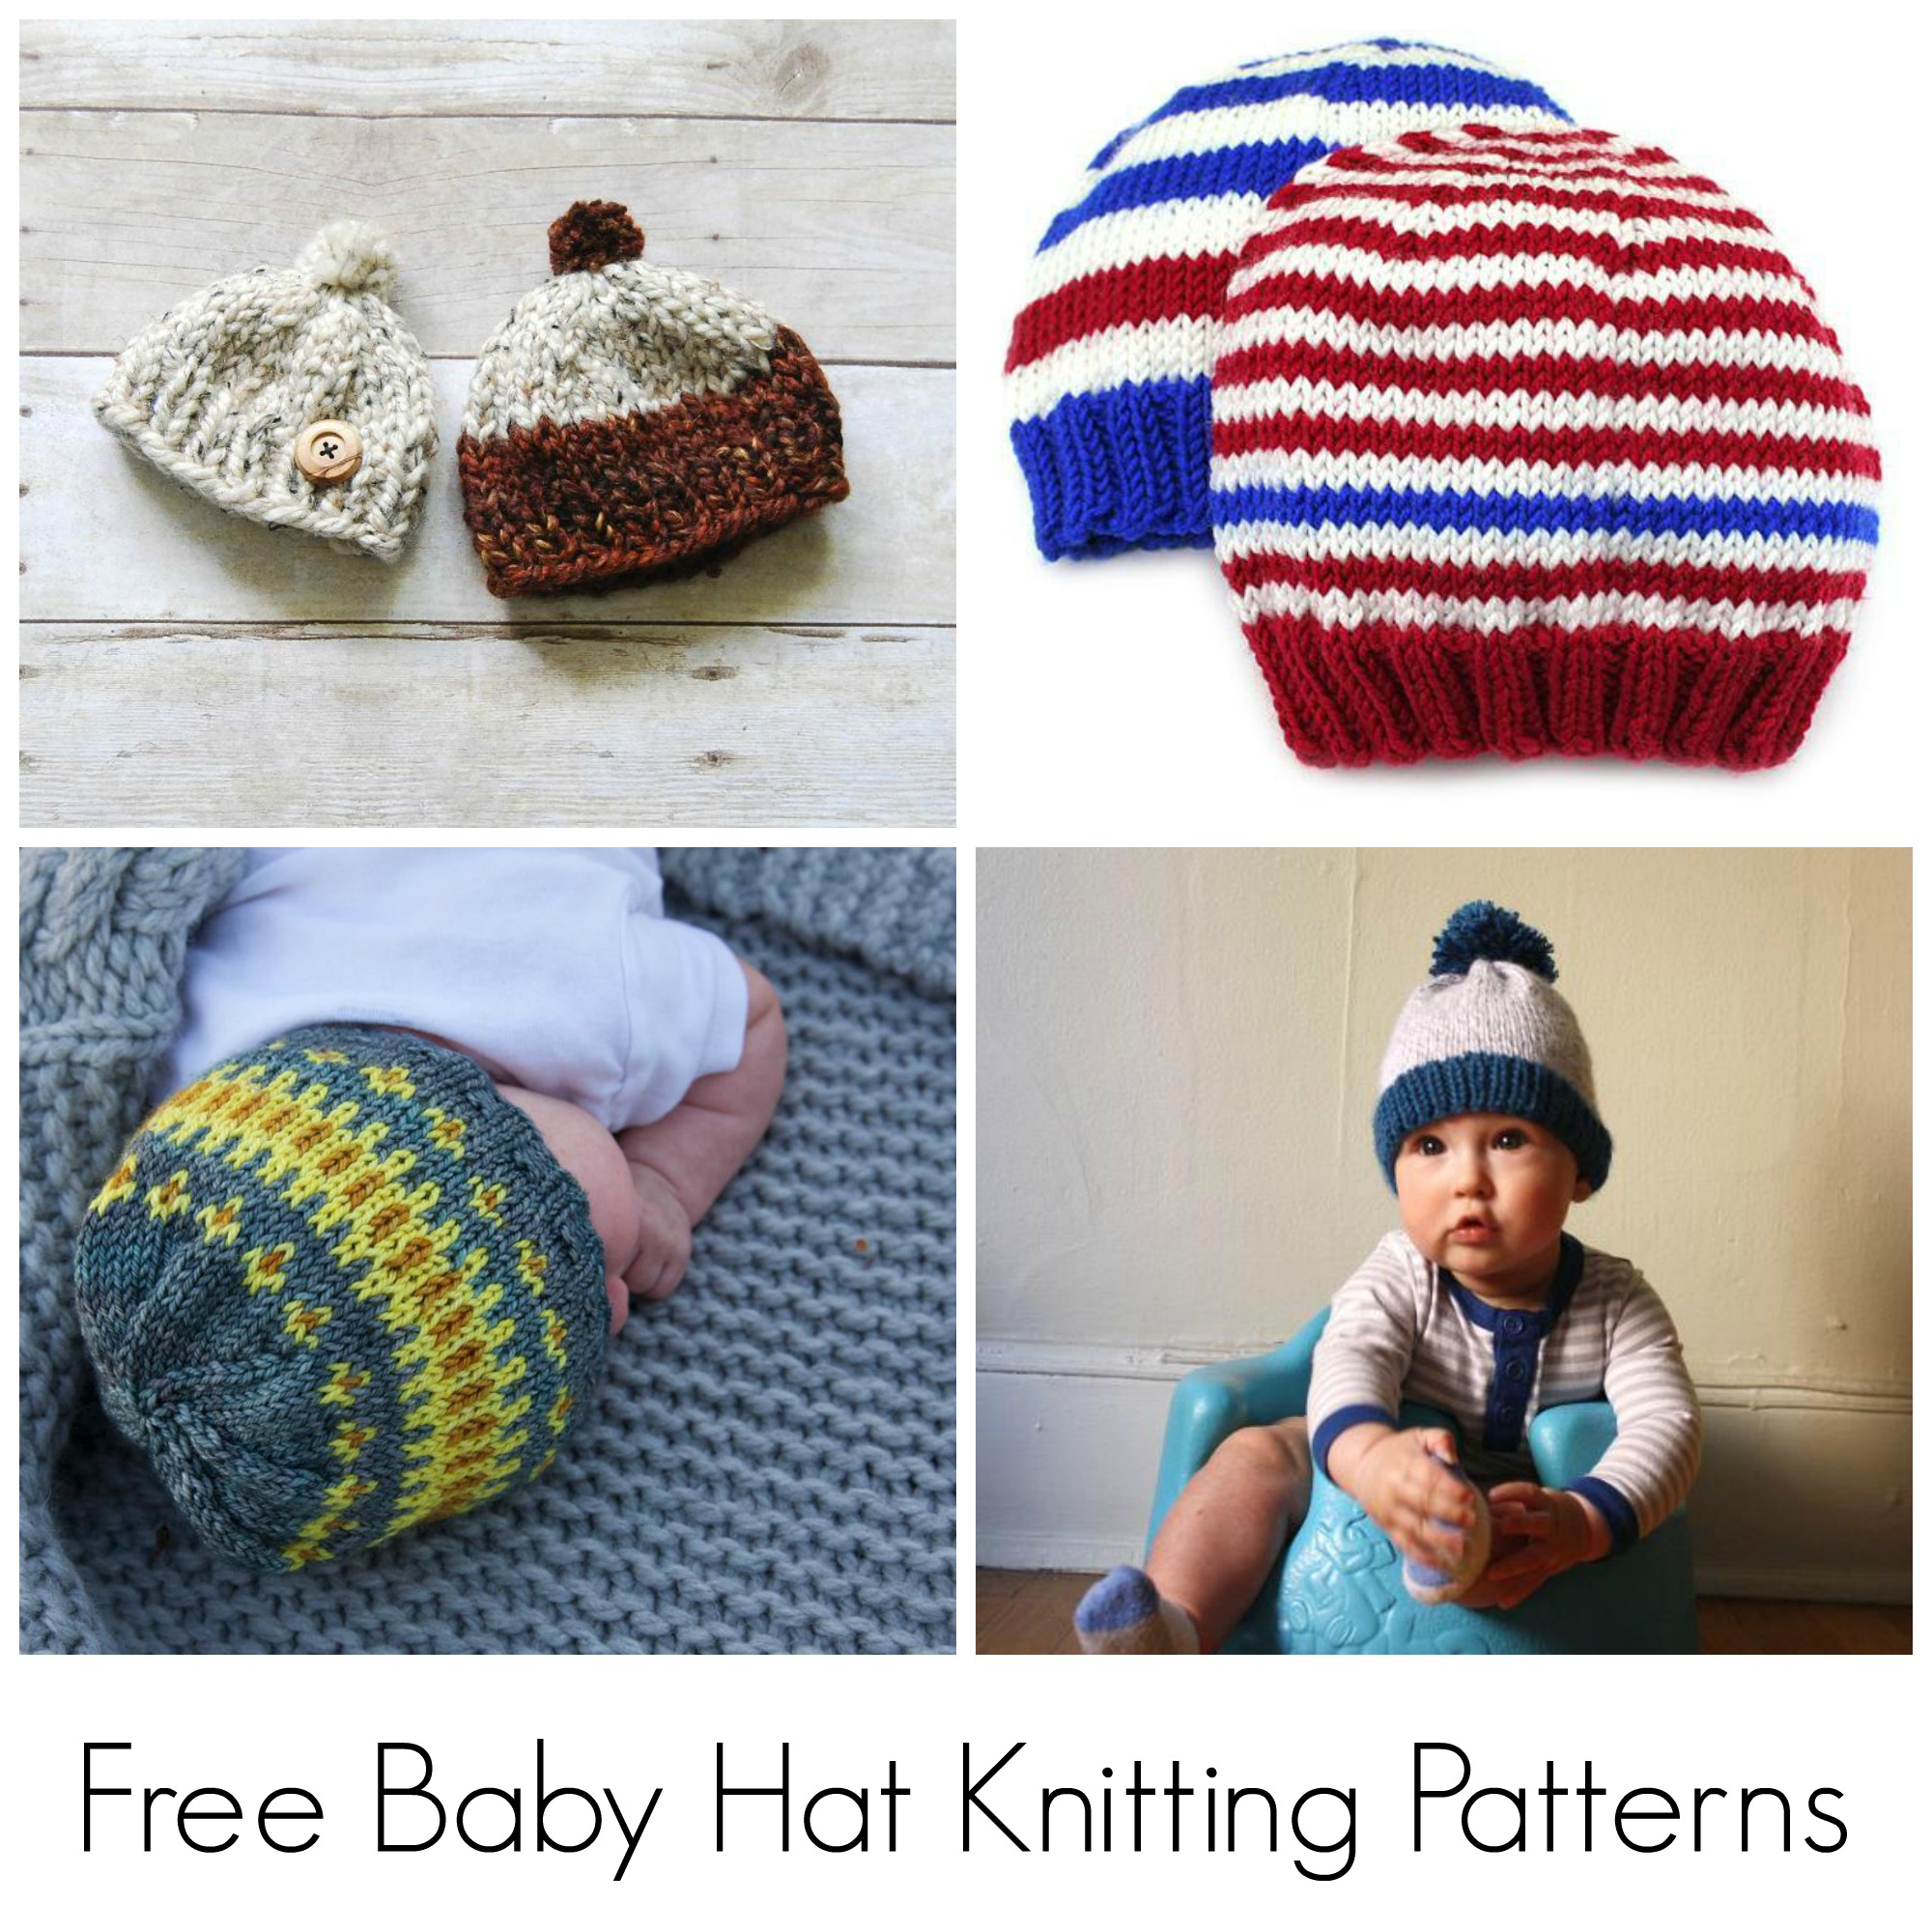 Knitted Preemie Hat Patterns 10 Free Knitting Patterns For Ba Hats On Craftsy